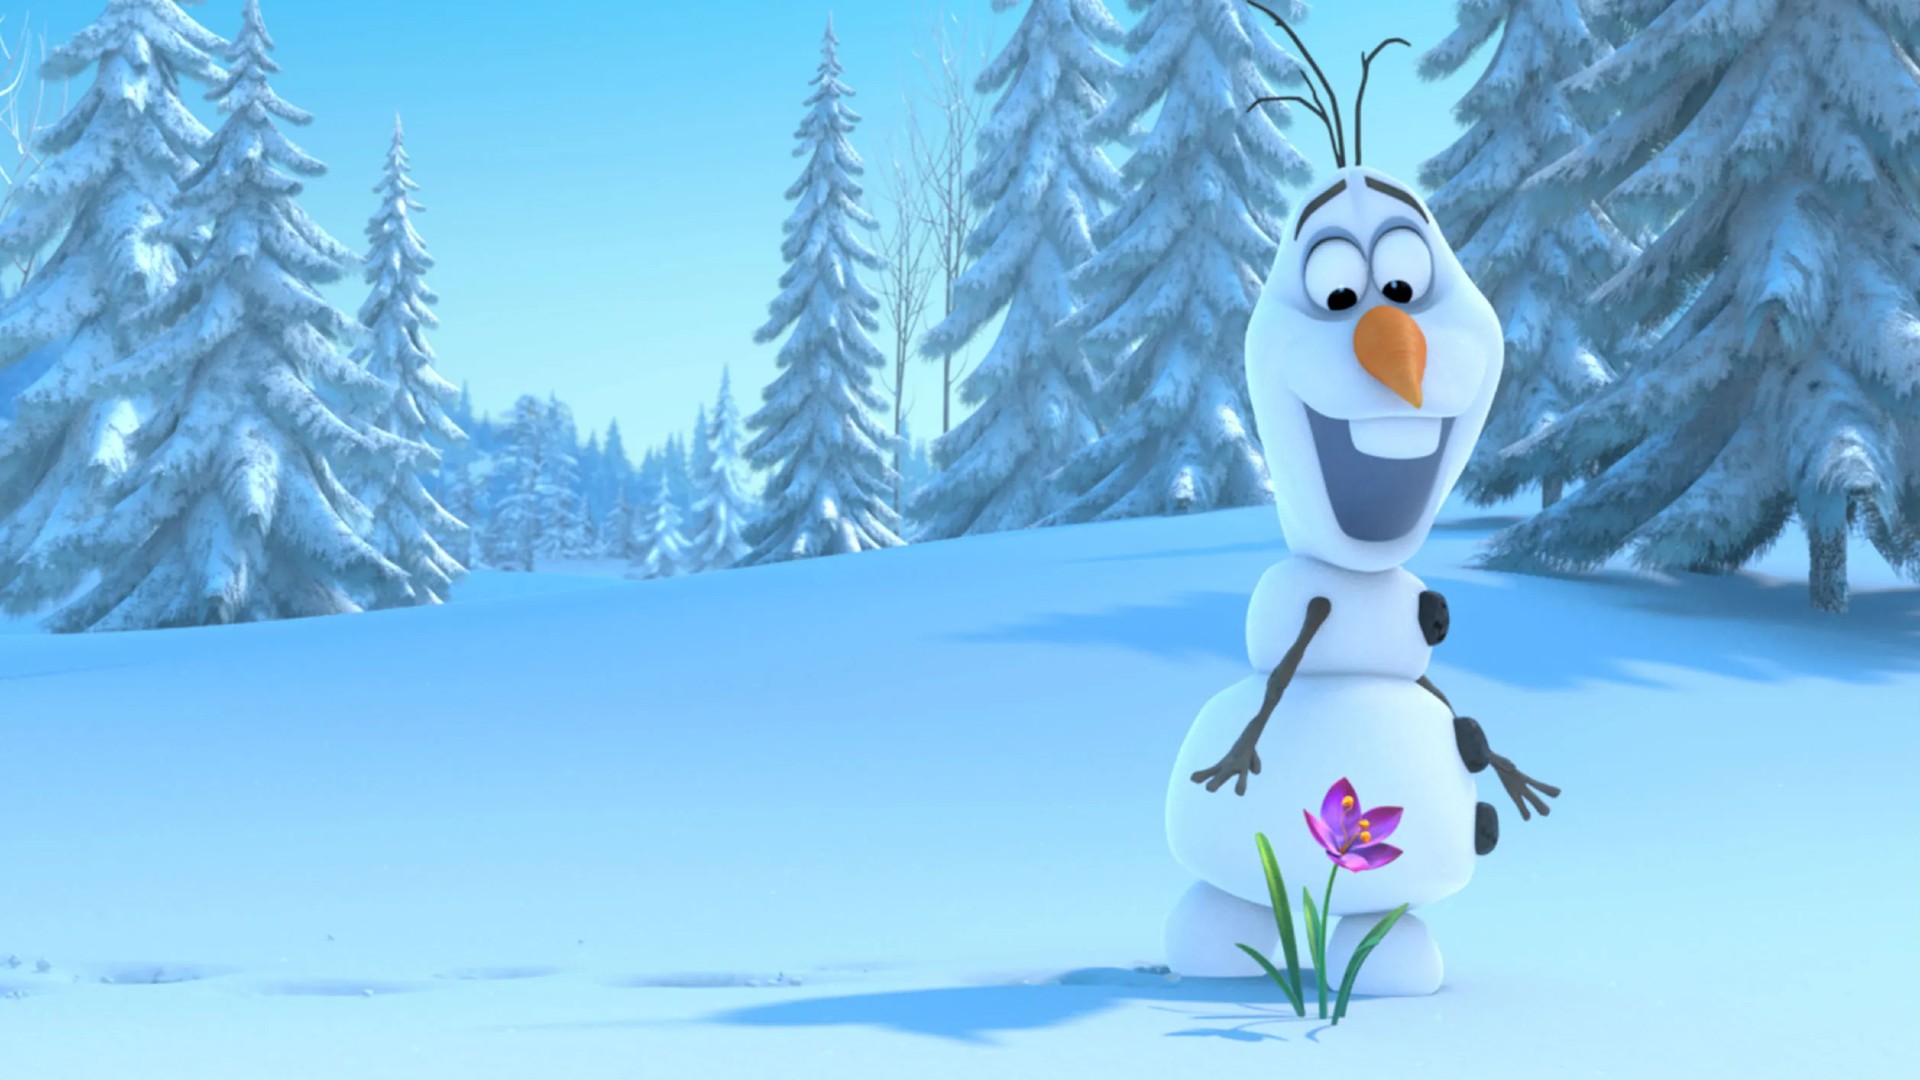 Frozen 3' Story Stems From an 'Incredible Idea,' Says Franchise Director